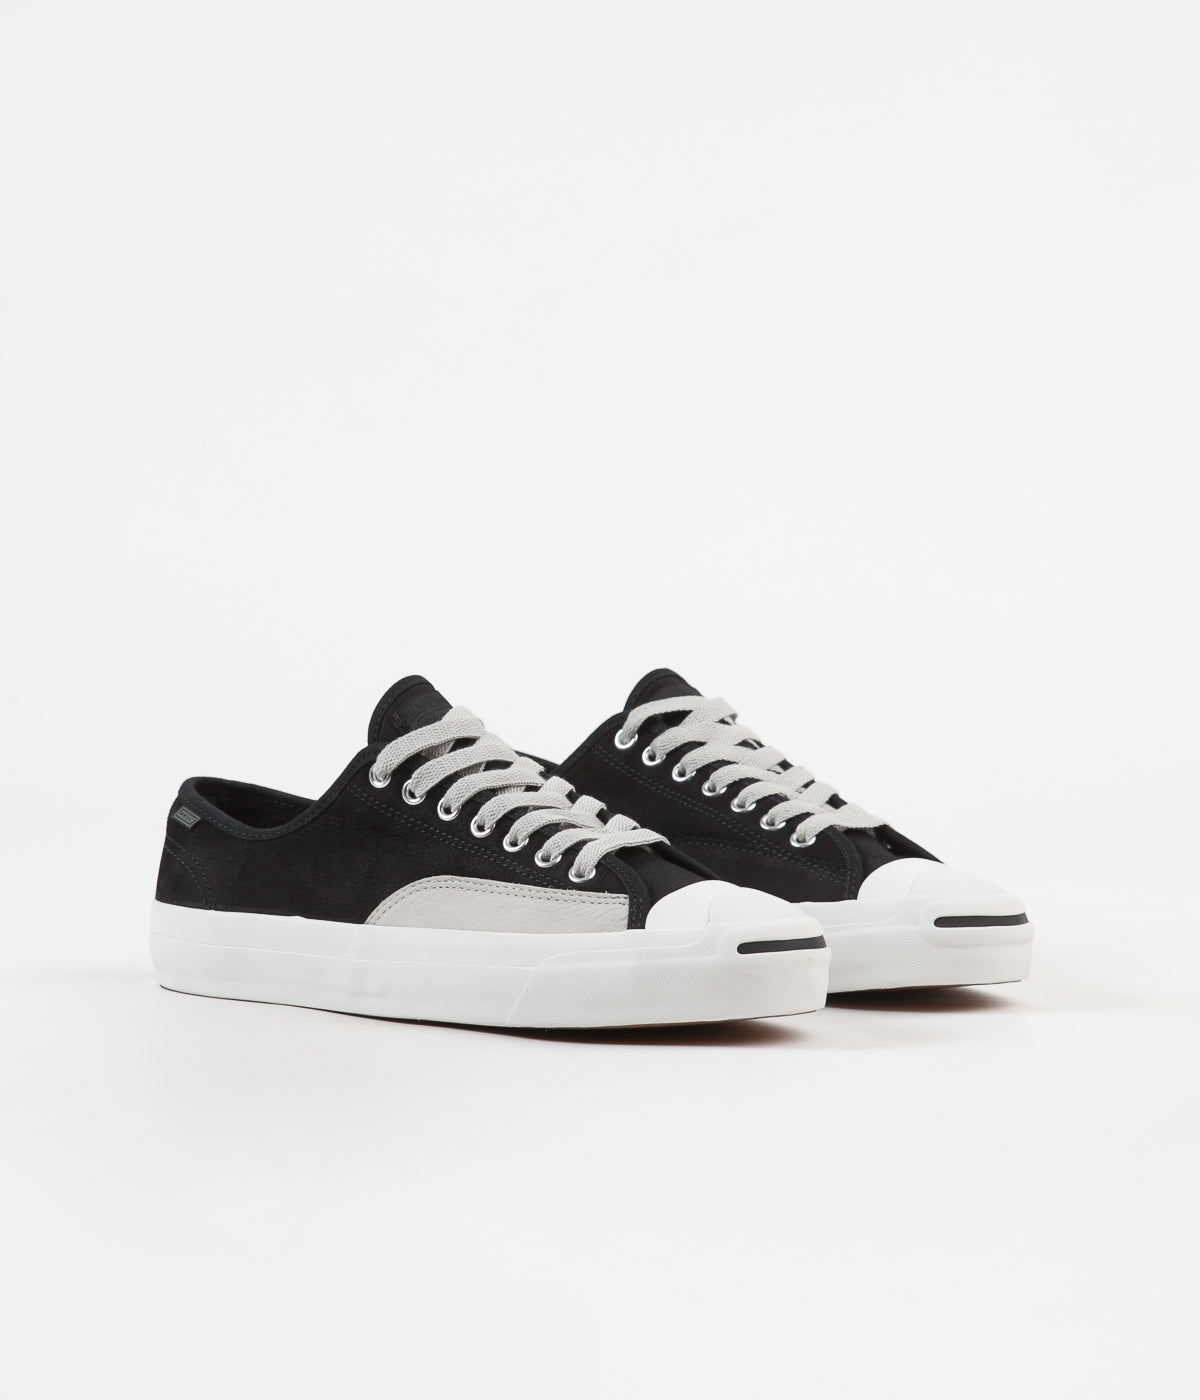 converse jack purcell pro shoes